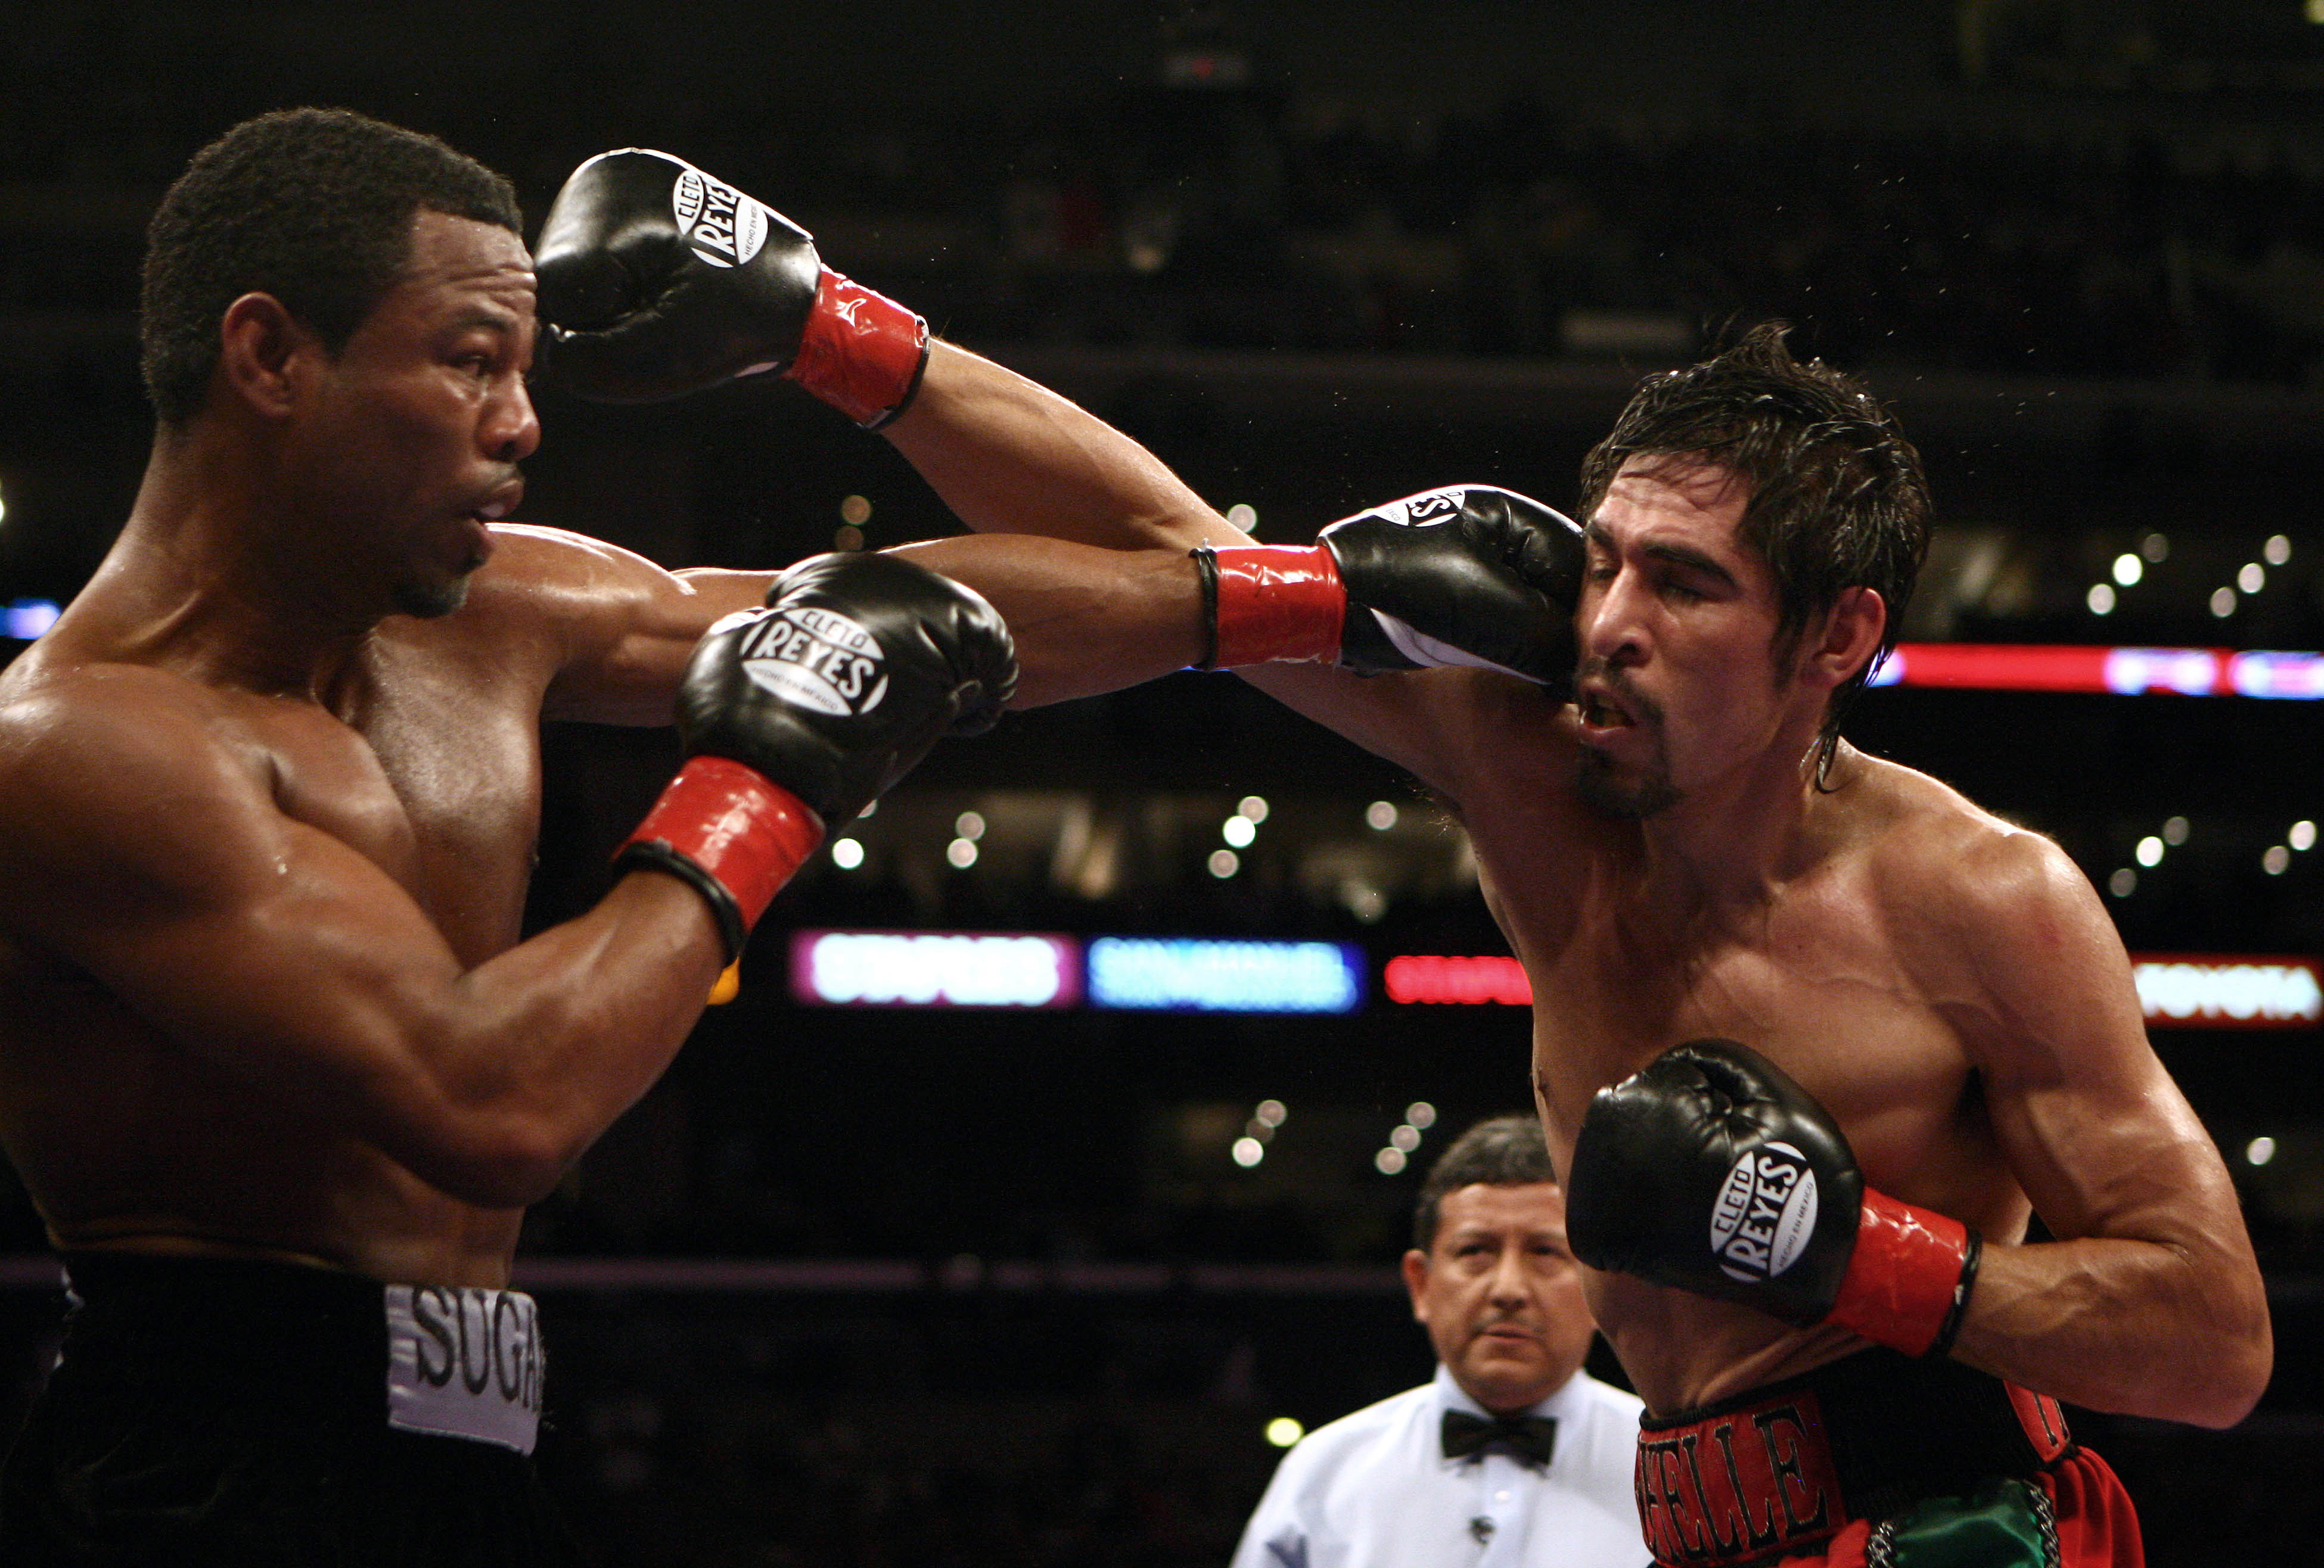 Manny Pacquiao/Antonio Margarito 24/7: 20 Things We Learned From